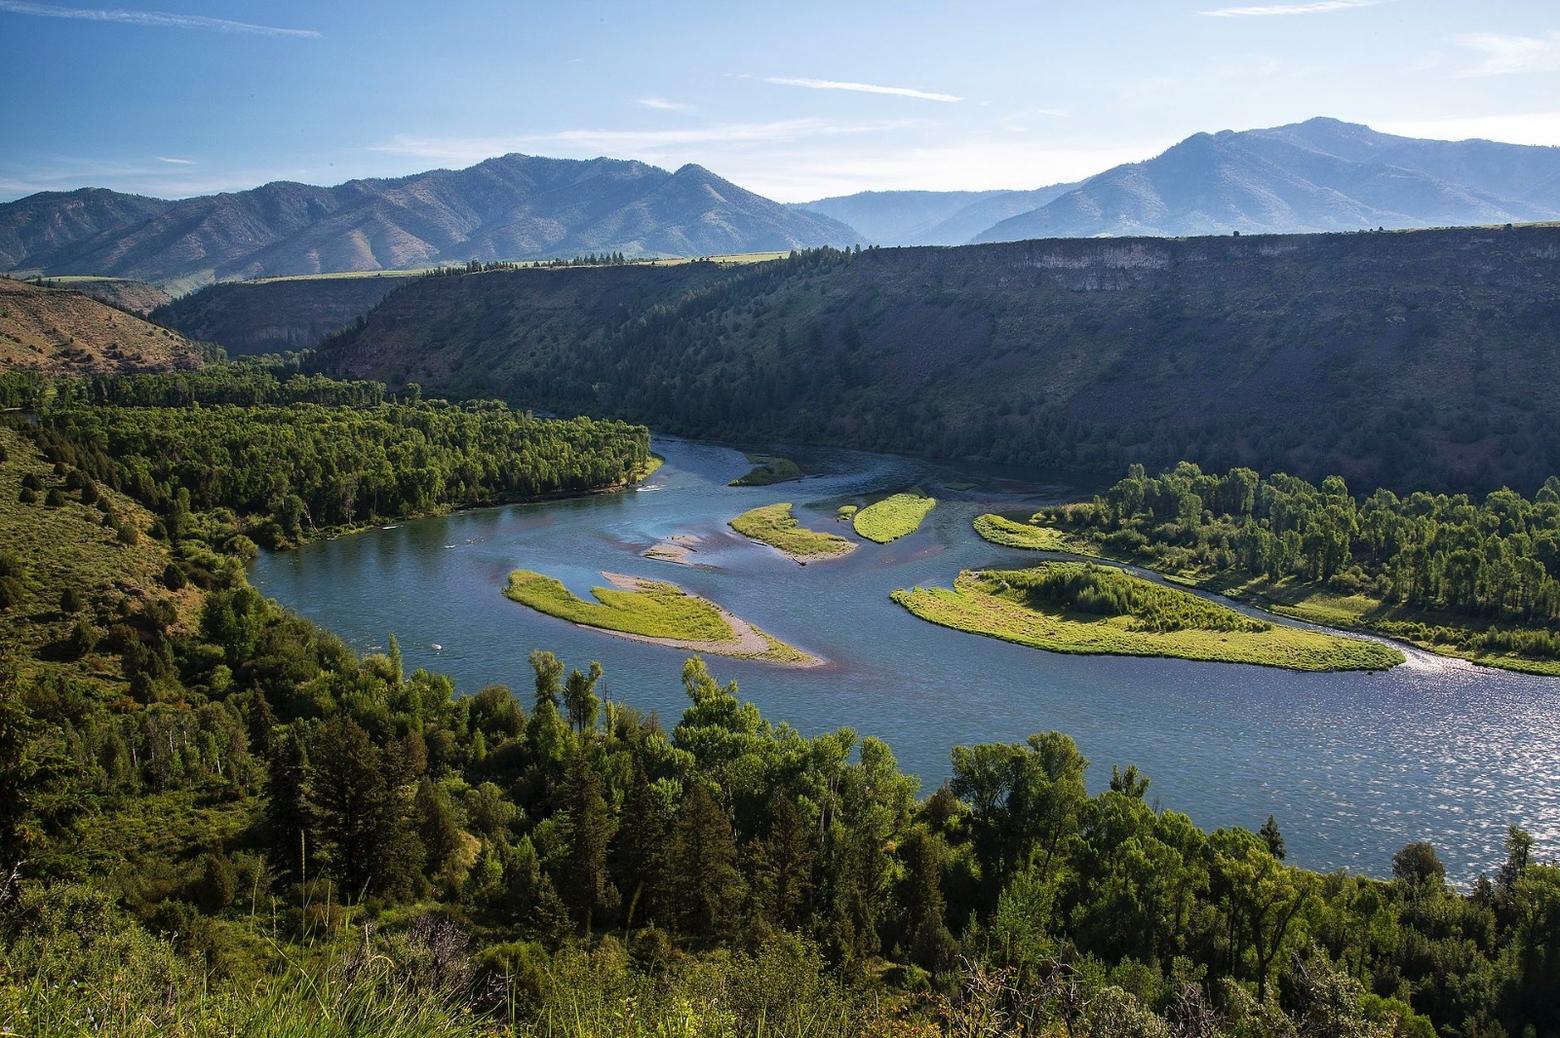 The South Fork of the Snake River in Idaho managed by the BLM. Imagine if, instead of it being protected, this popular stretch was lined by trophy homes and/or turned into a water park.  As Newcomb notes, unimpaired places always demonstrate their higher intangible value over time. And once they are gone you can't get them back.  Photo courtesy Bureau of Land Management.